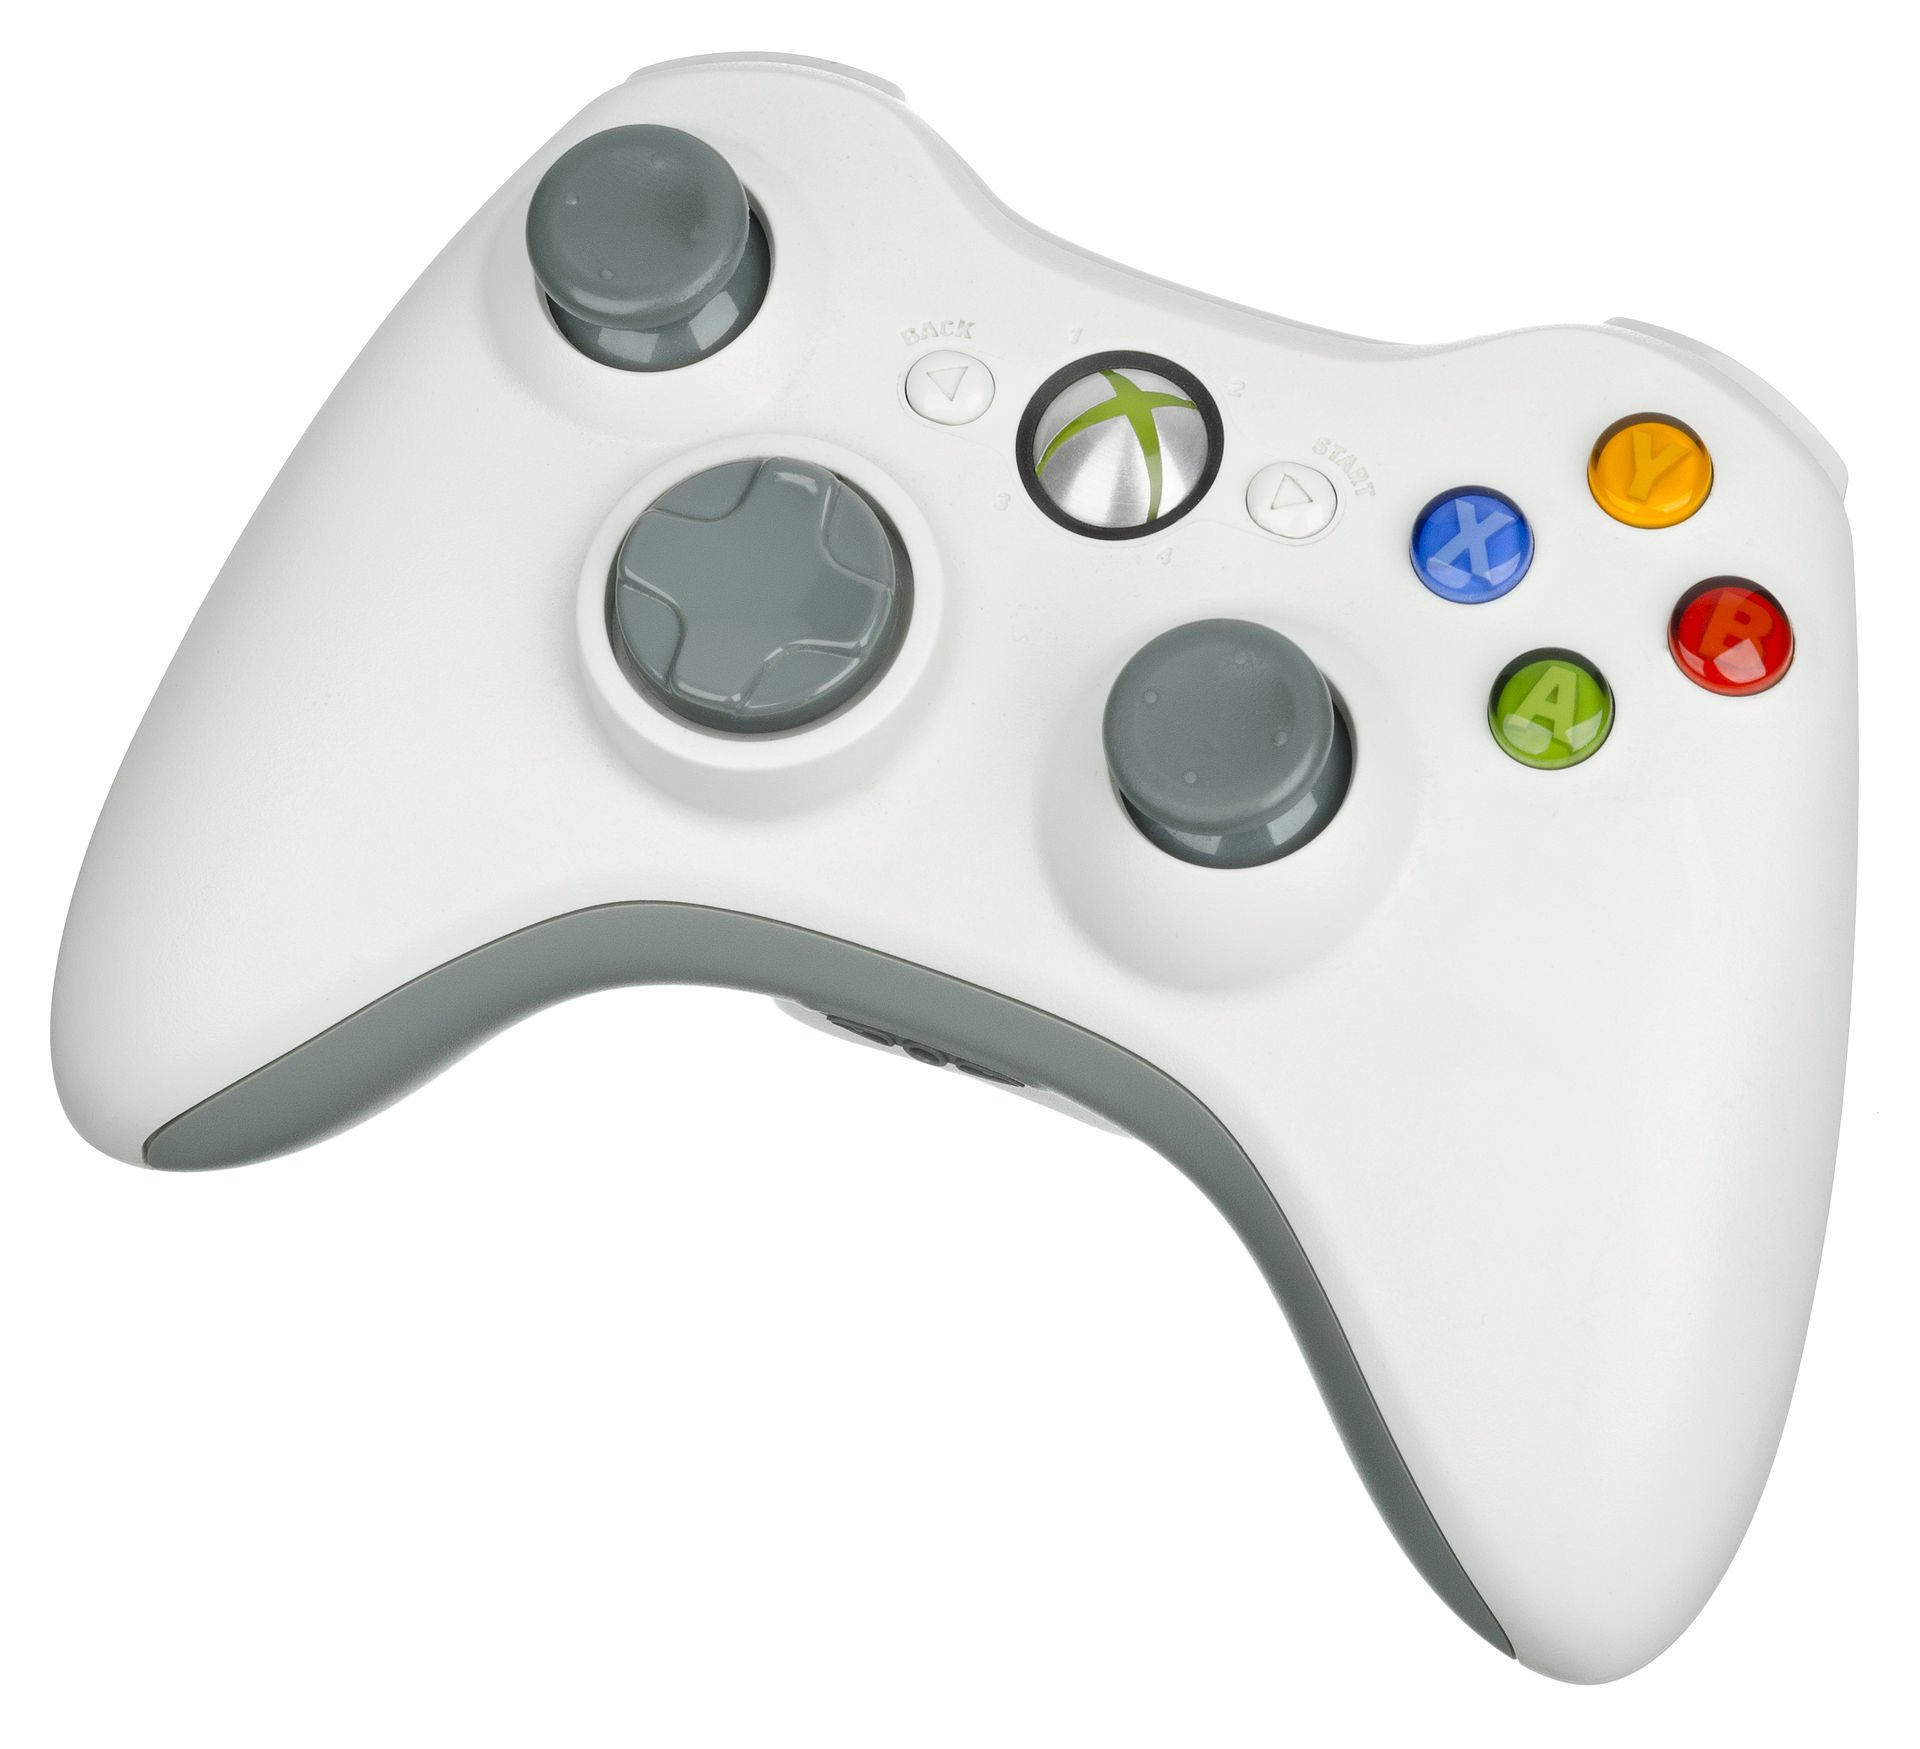 Microsoft's Iconic Xbox 360 Controller Is Being Resurrected - IGN